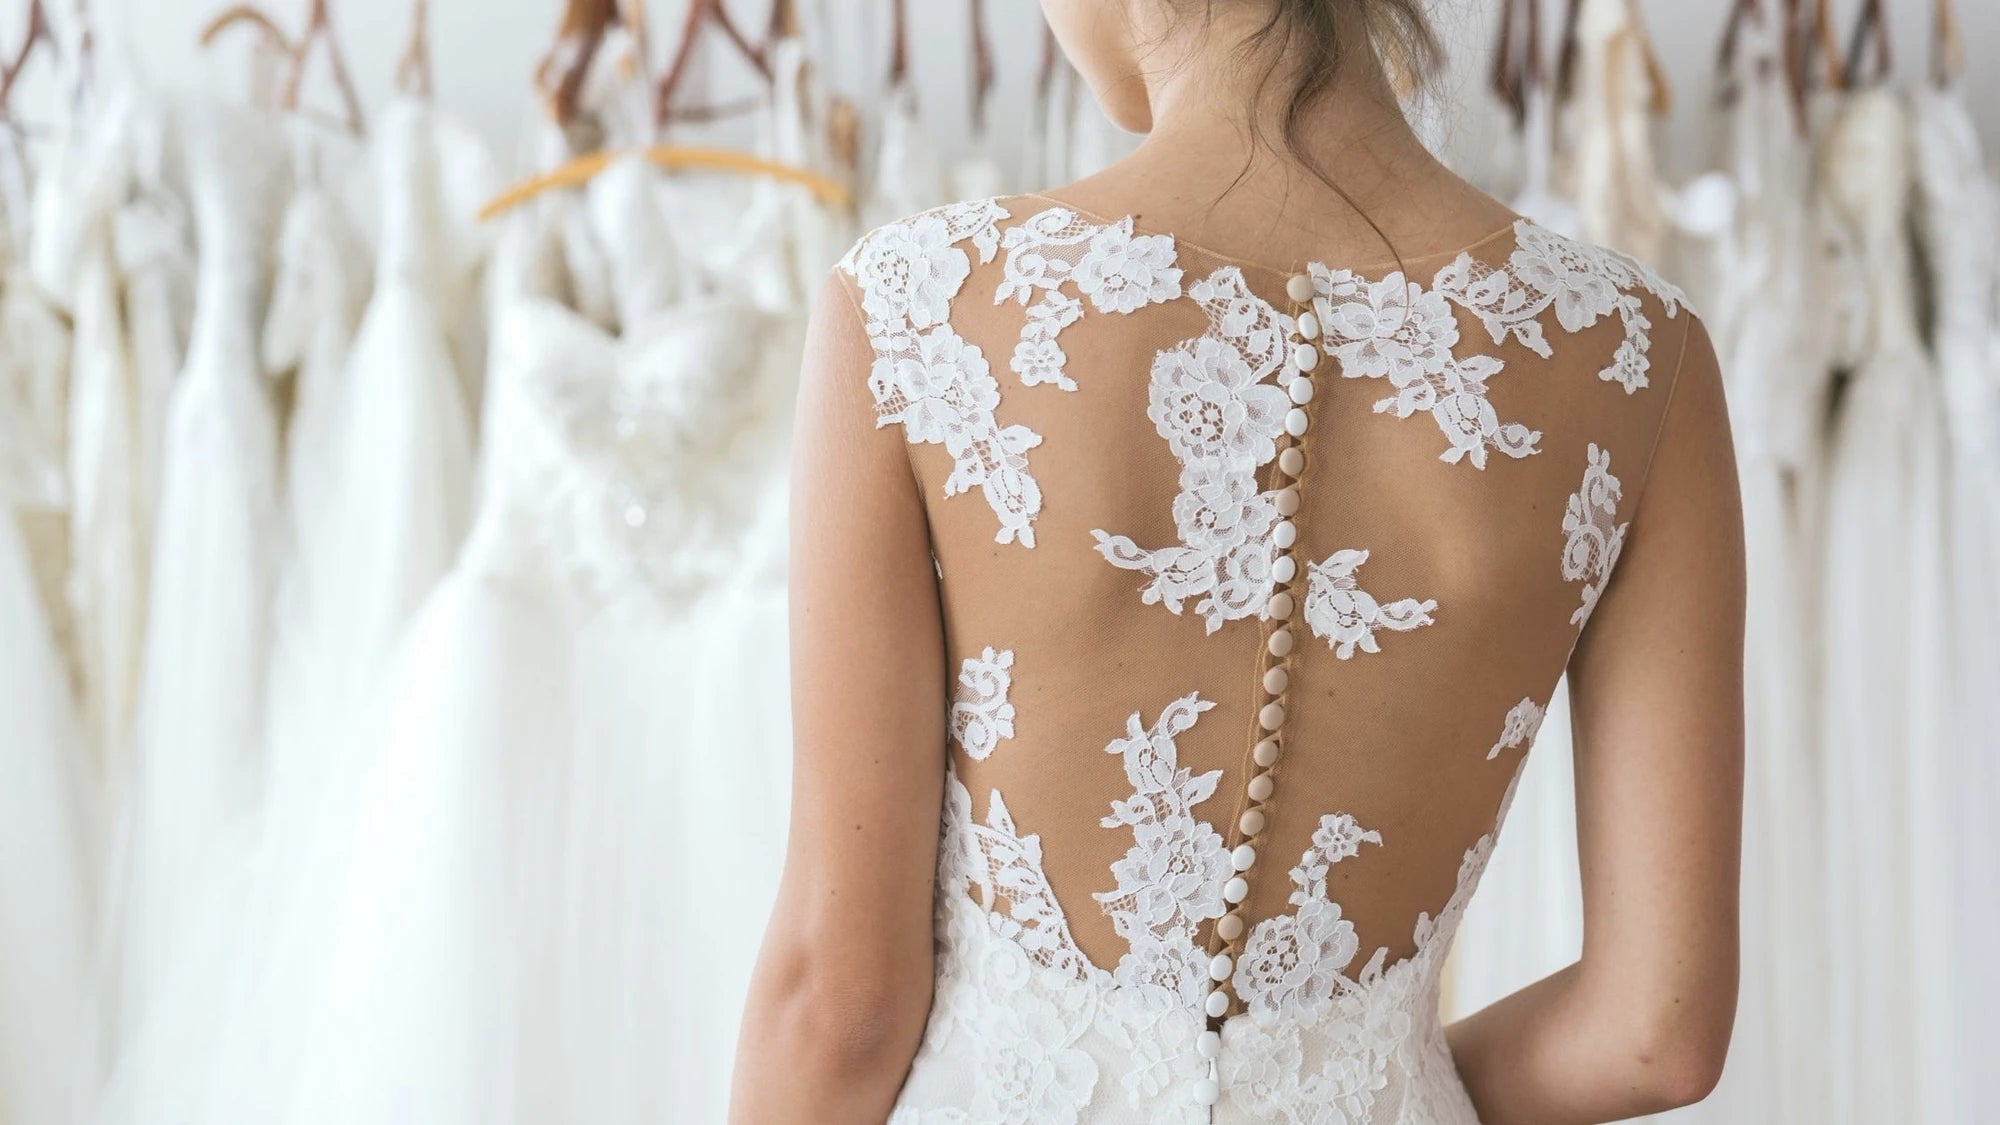 What are the best stick on bras to wear with my Wedding Dress